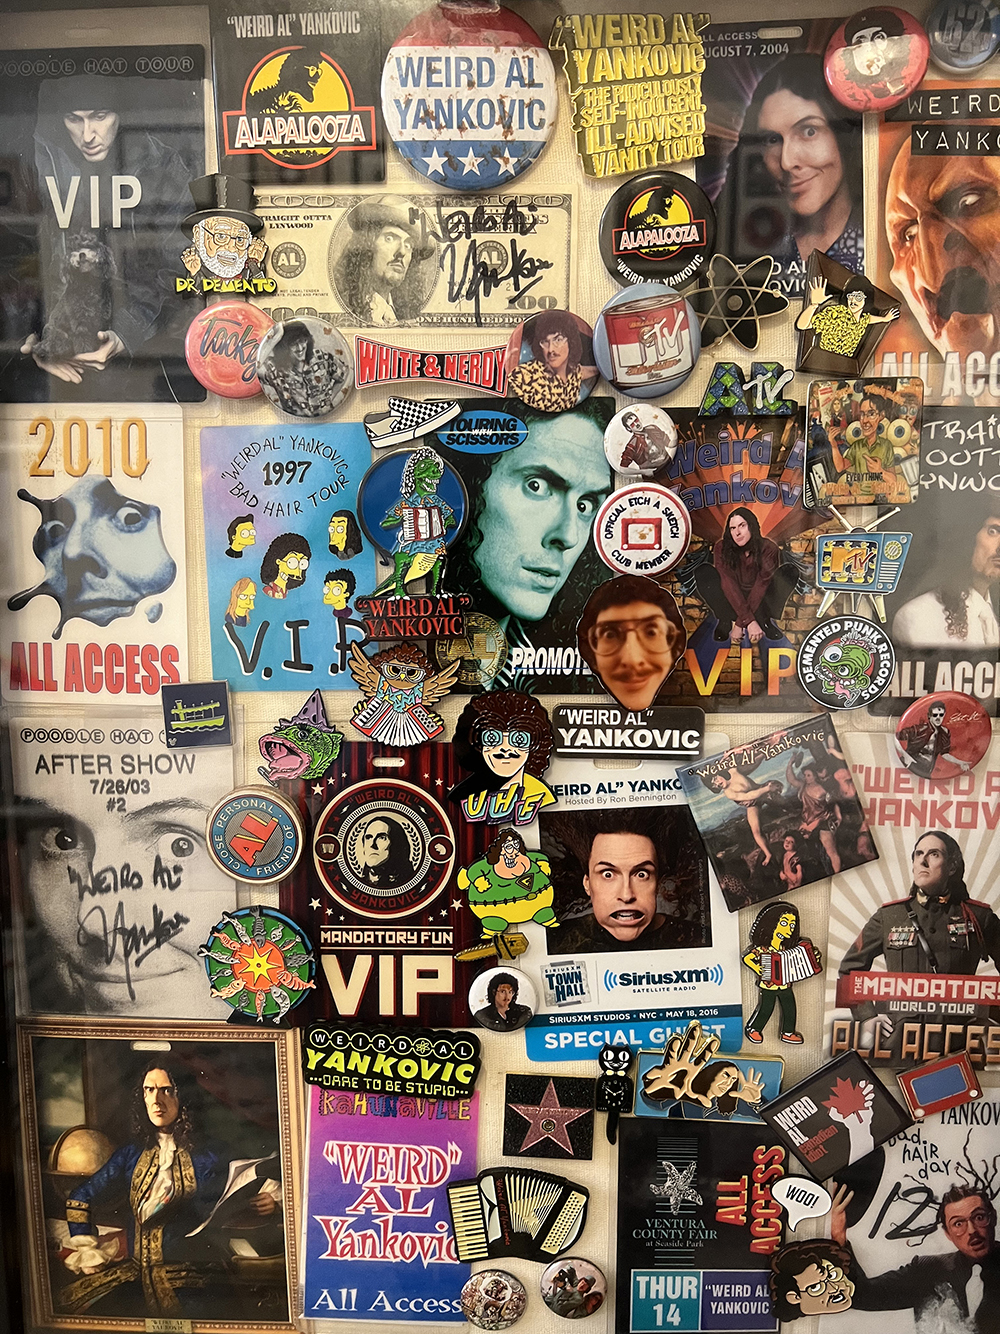 image from a Season 5 episode of MeTV's "Collector's Call." It is a vertical image filled with all sorts of "Weird Al" Yankovic memorabilia in the form of magnets and stickers on a refrigerator door.